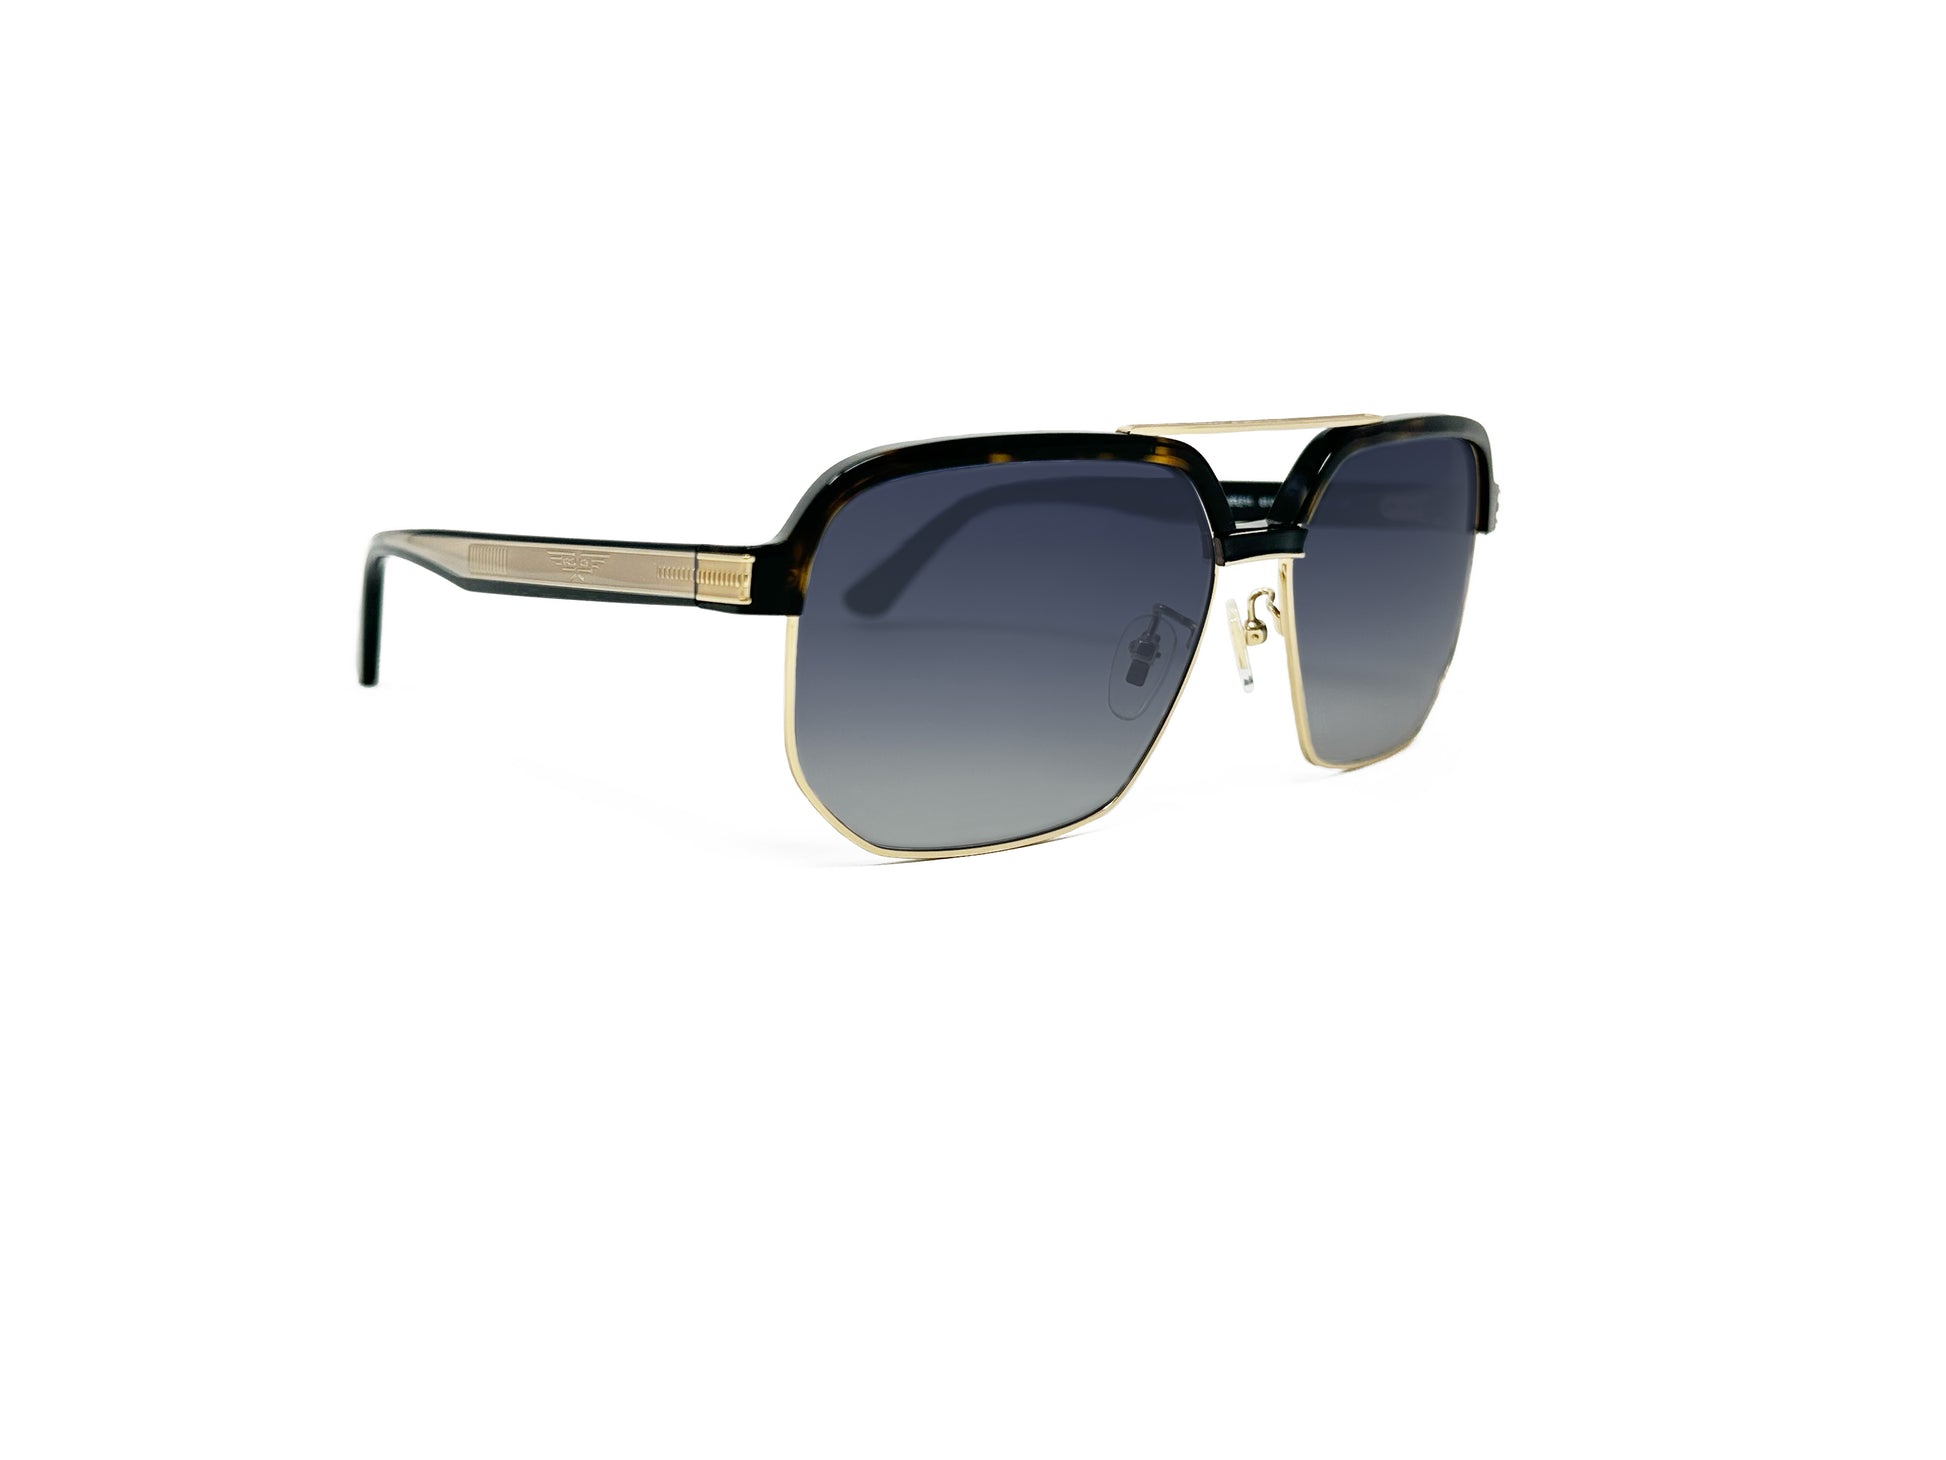 Police squared aviator style sunglass with bar across top. Model: SPLF11 Origins Hero 1. Color: 0301. Side view.